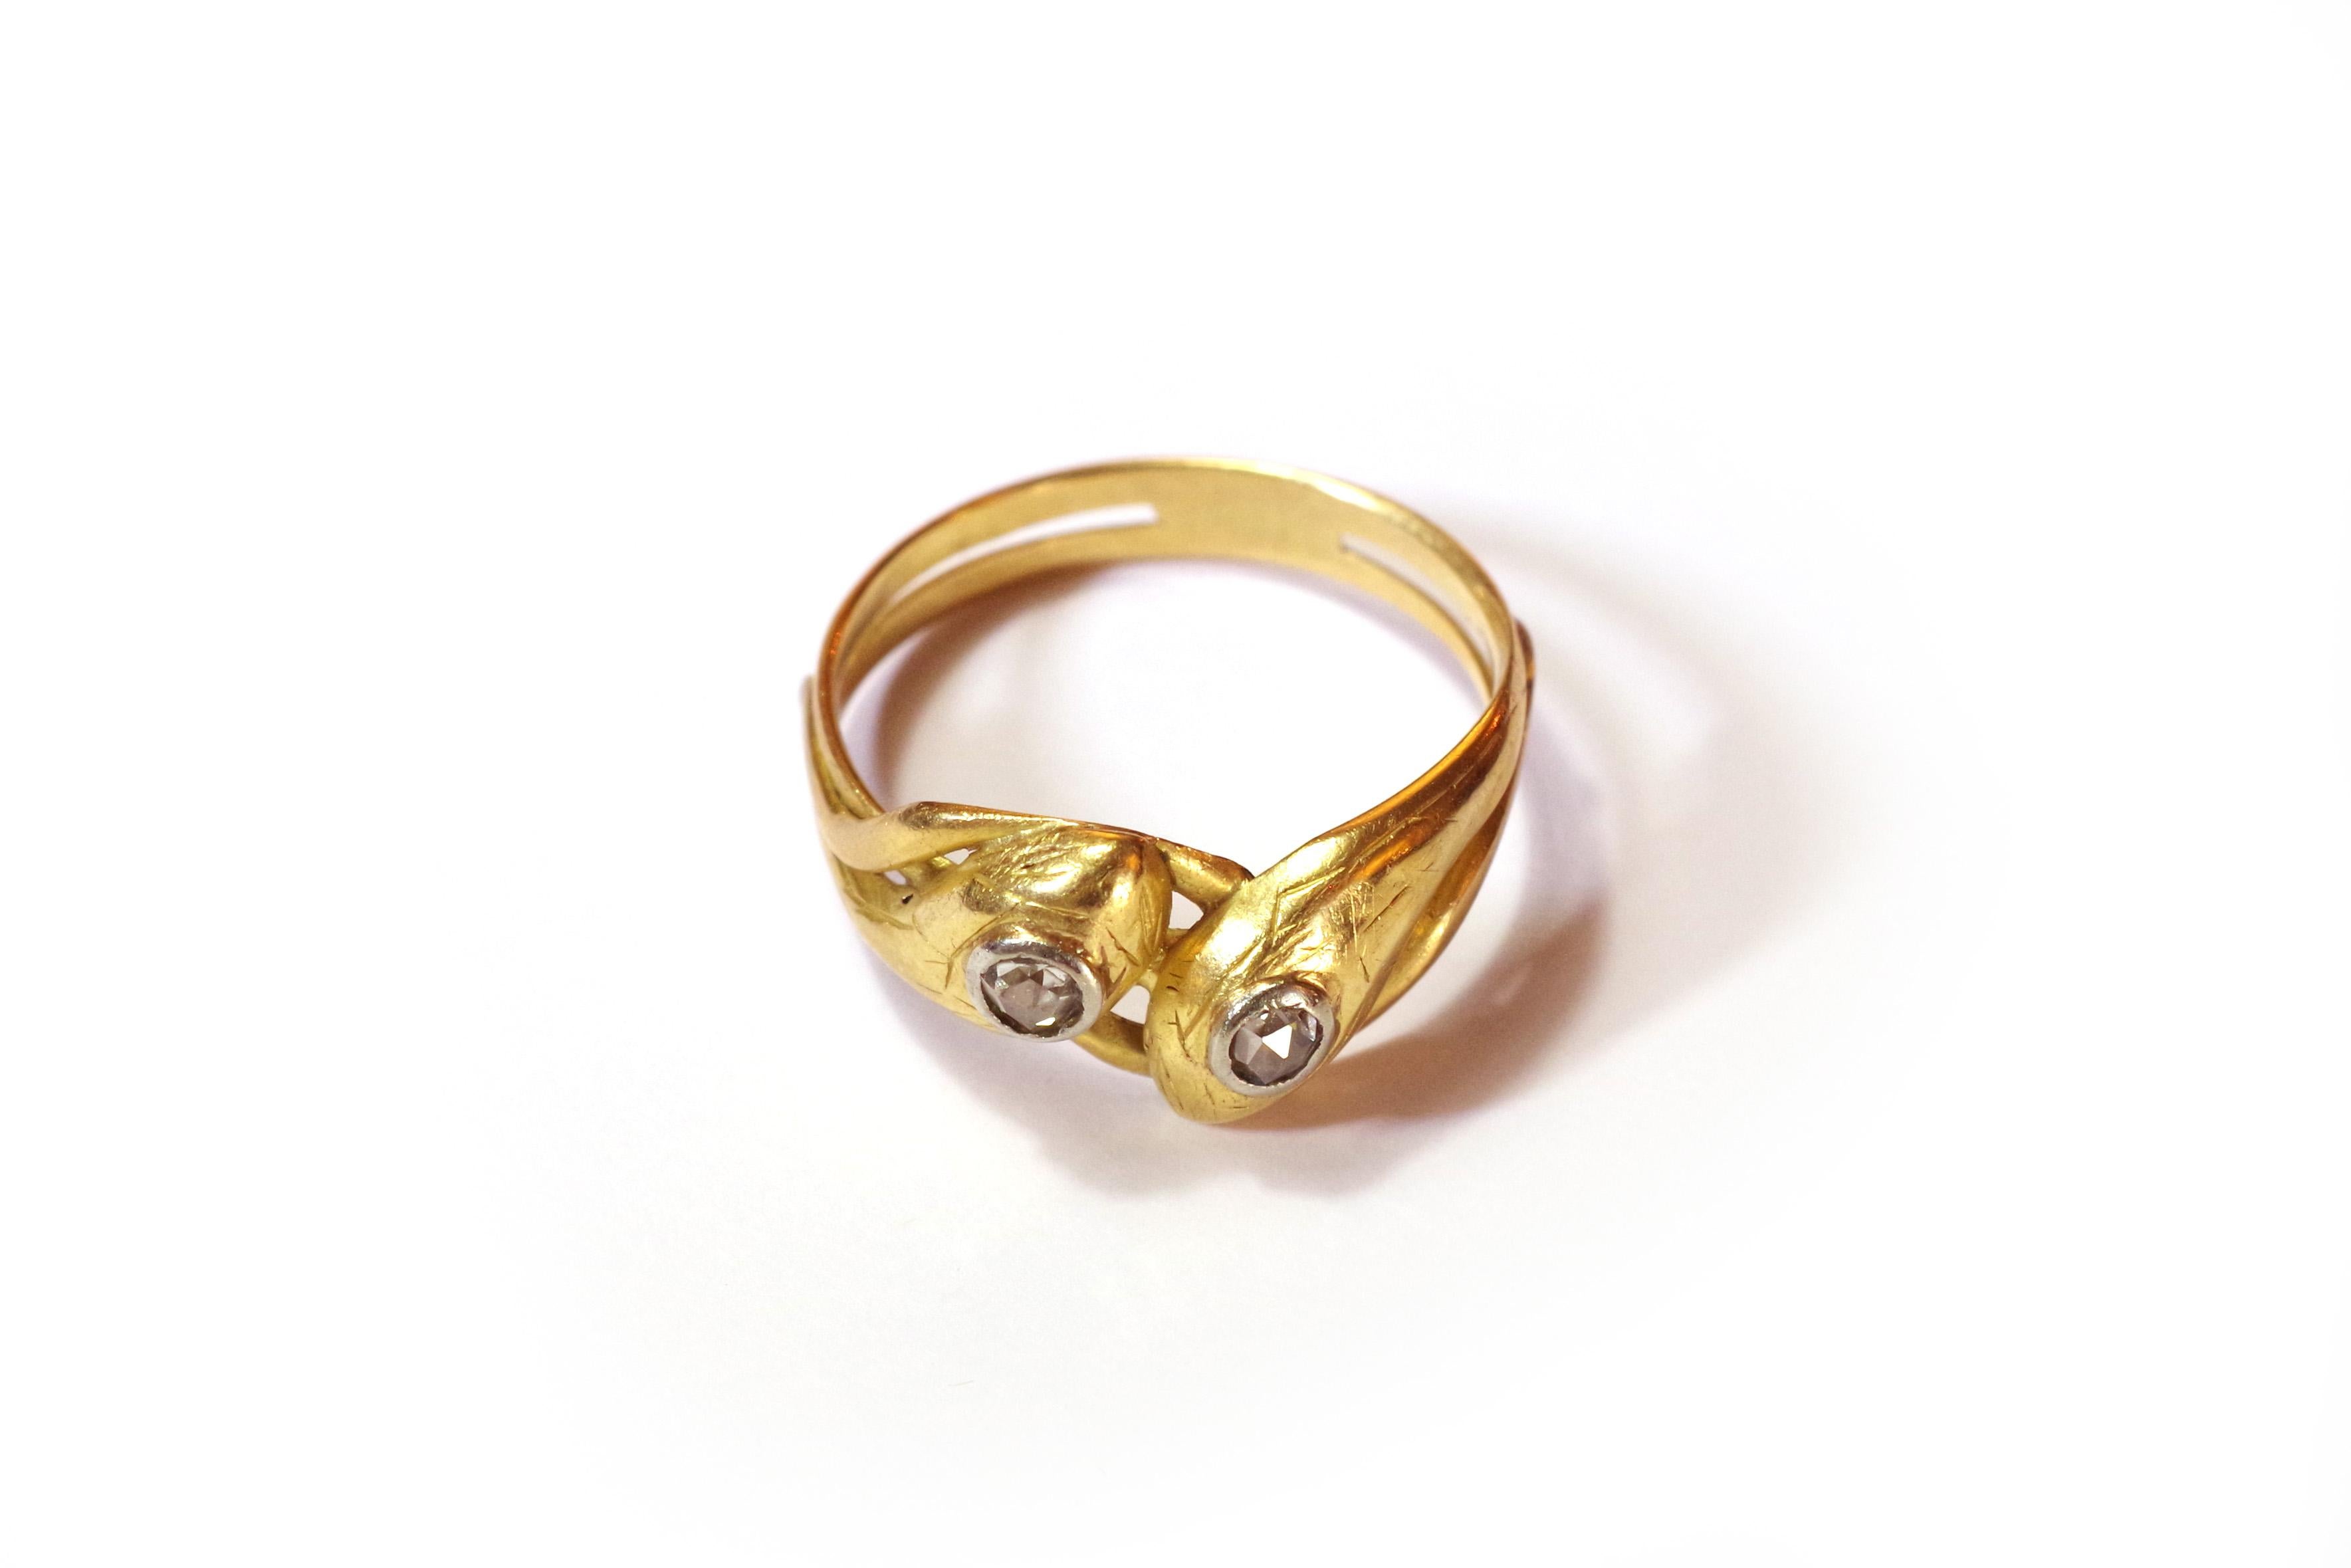 Victorian double snake ring in yellow gold 18 karats and silver. This ring is made by two snakes wrapping around the finger. The heads of the two reptiles are surmounted by a Dutch rose-cut diamond. The heads are delicately chiselled and come to